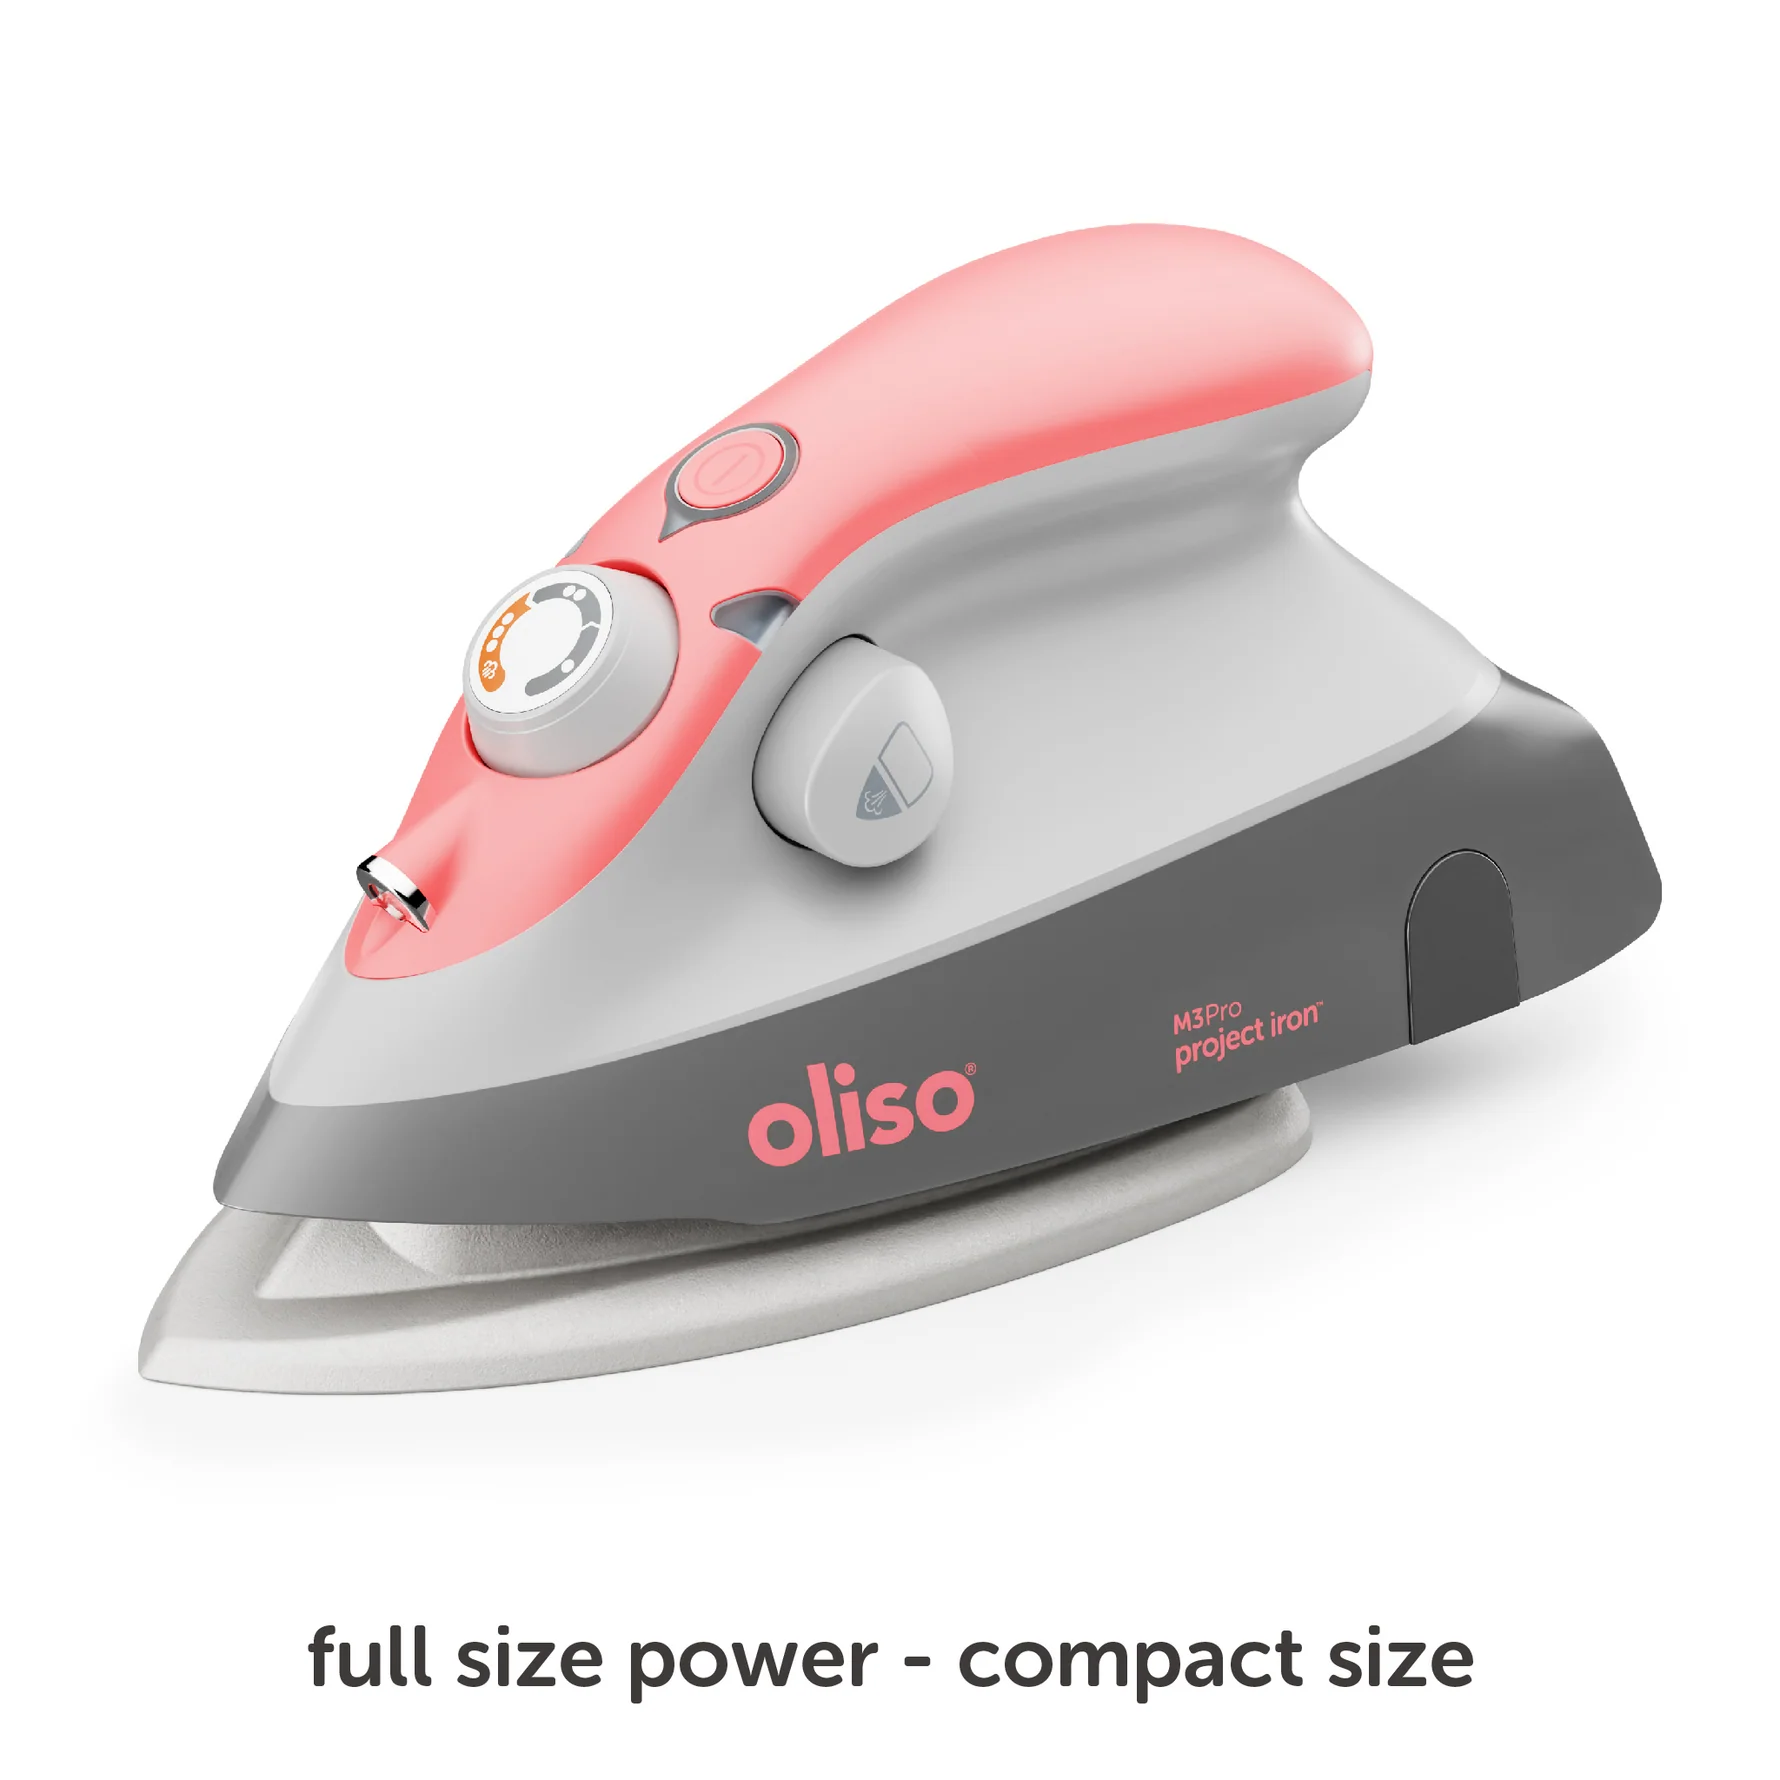 https://www.sewingmachinesplus.com/media/products/oliso/M3PRO-CORAL/moreinfo/1.png